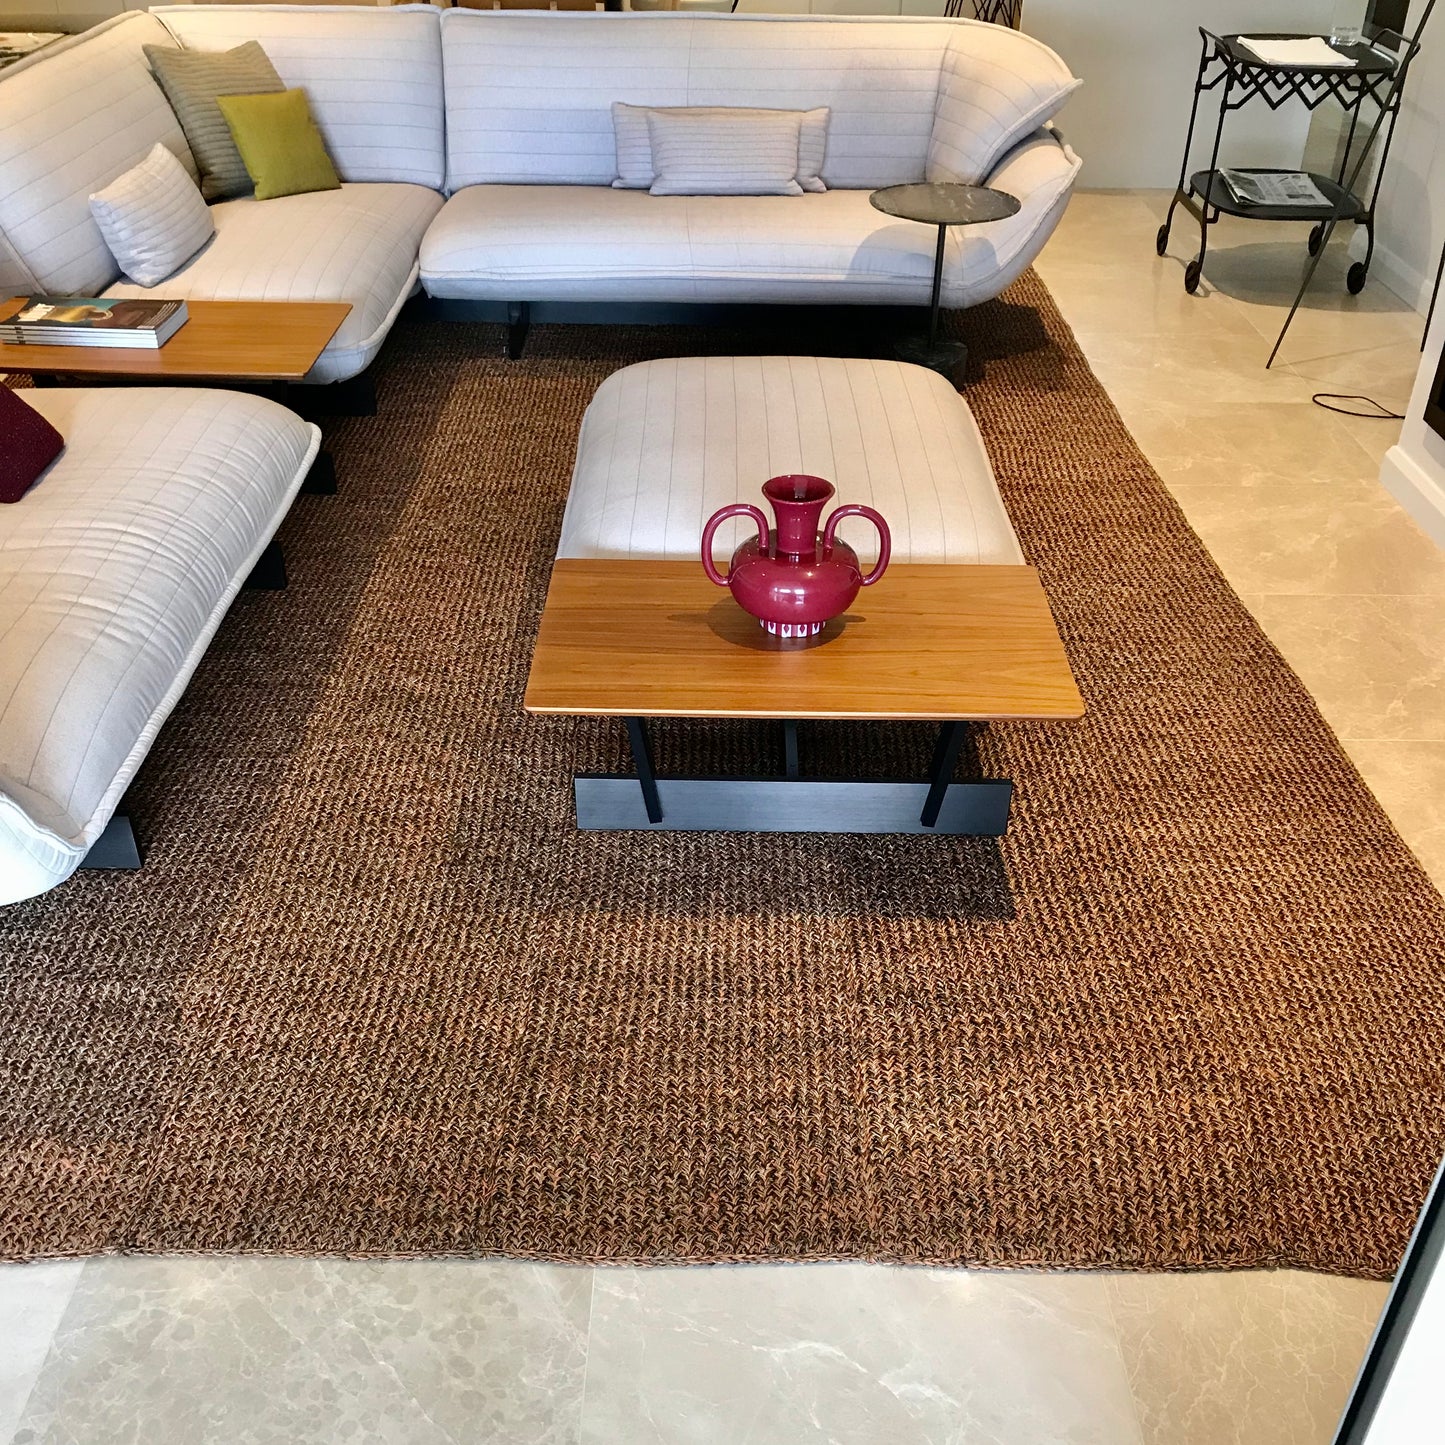 Maglia Hand Knitted Area Rug by Cassina Carpets 4500 x 3000